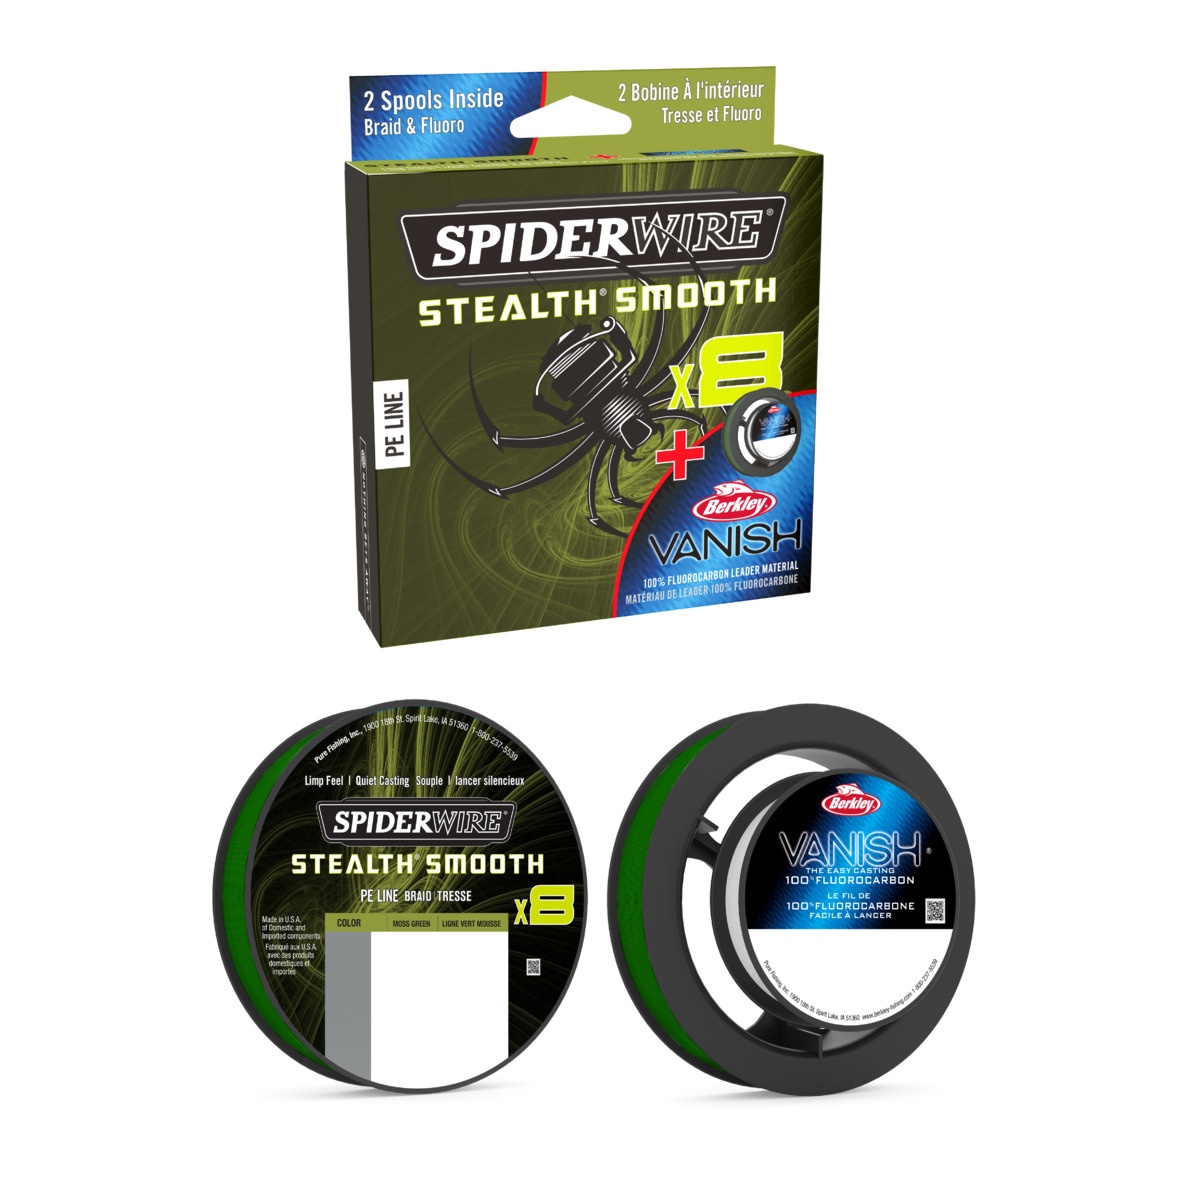 Spiderwire 8 Braid And Fluorocarbon Duo Spool System - 150 m msgrn/Vanish 40 m 0.13/0.35 mm